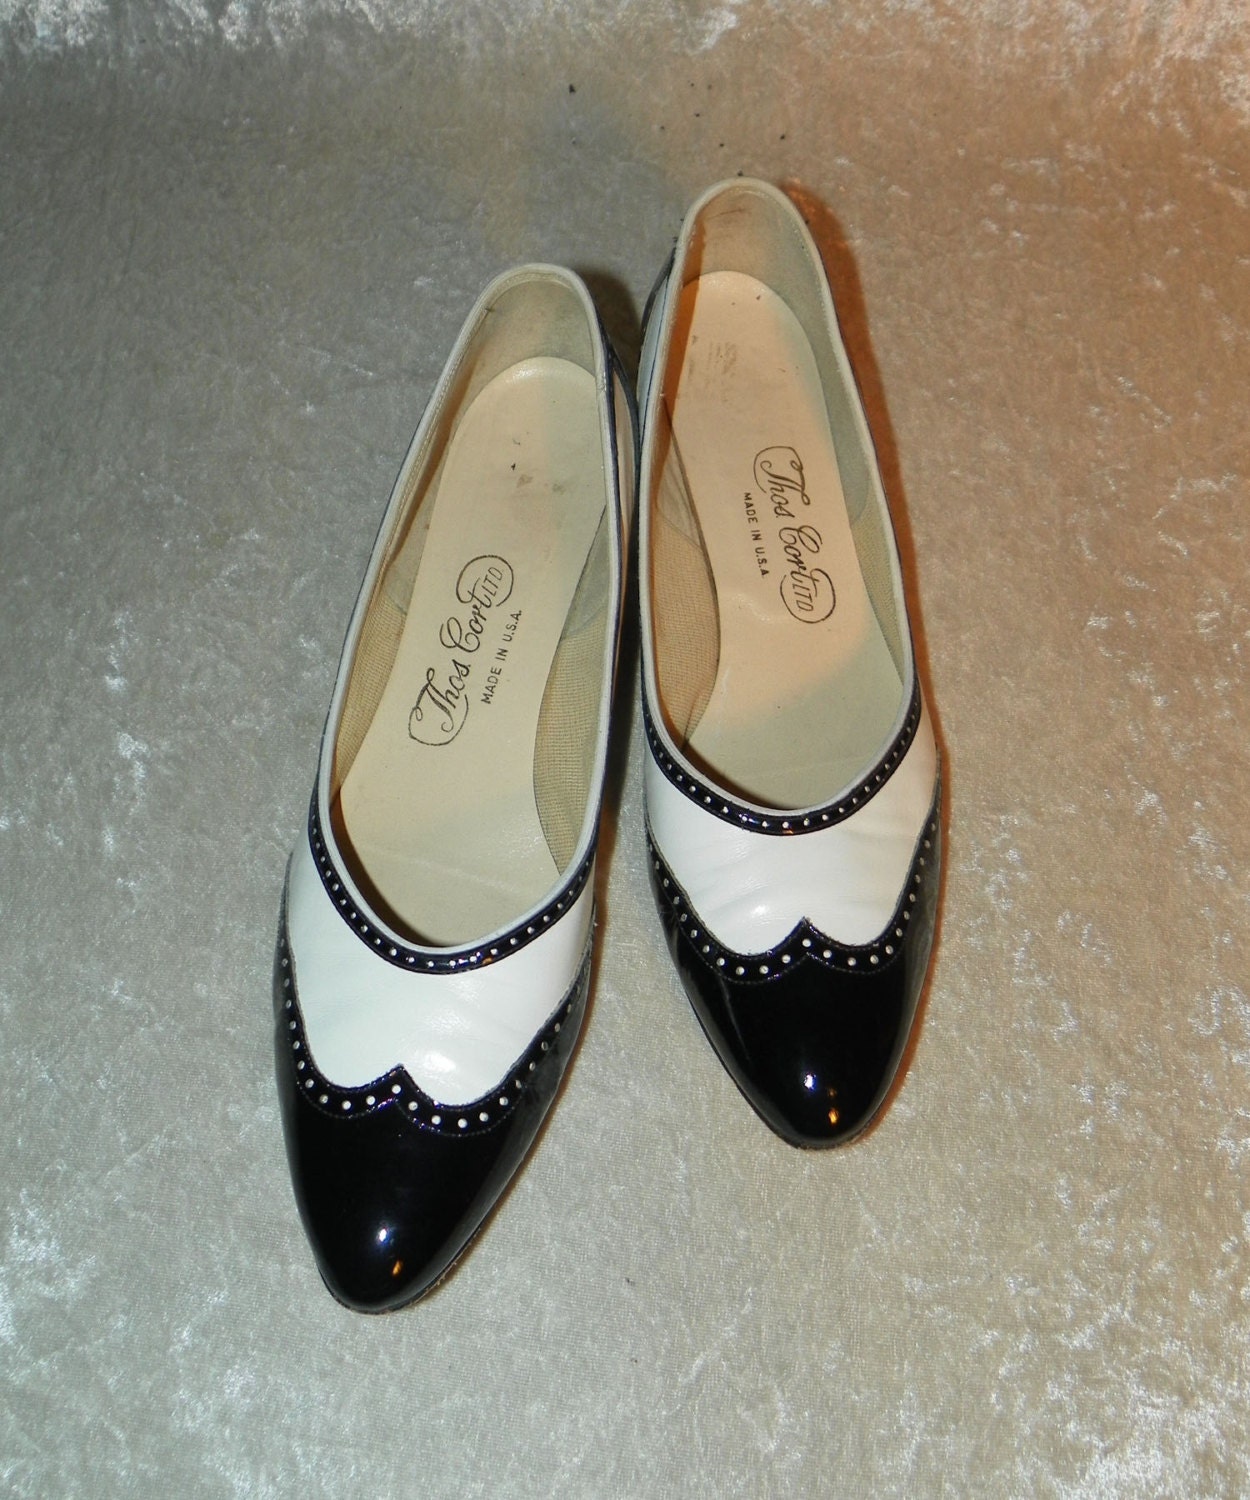 Shoes Black & White Wingtip Spectator Shoes Flats Leather